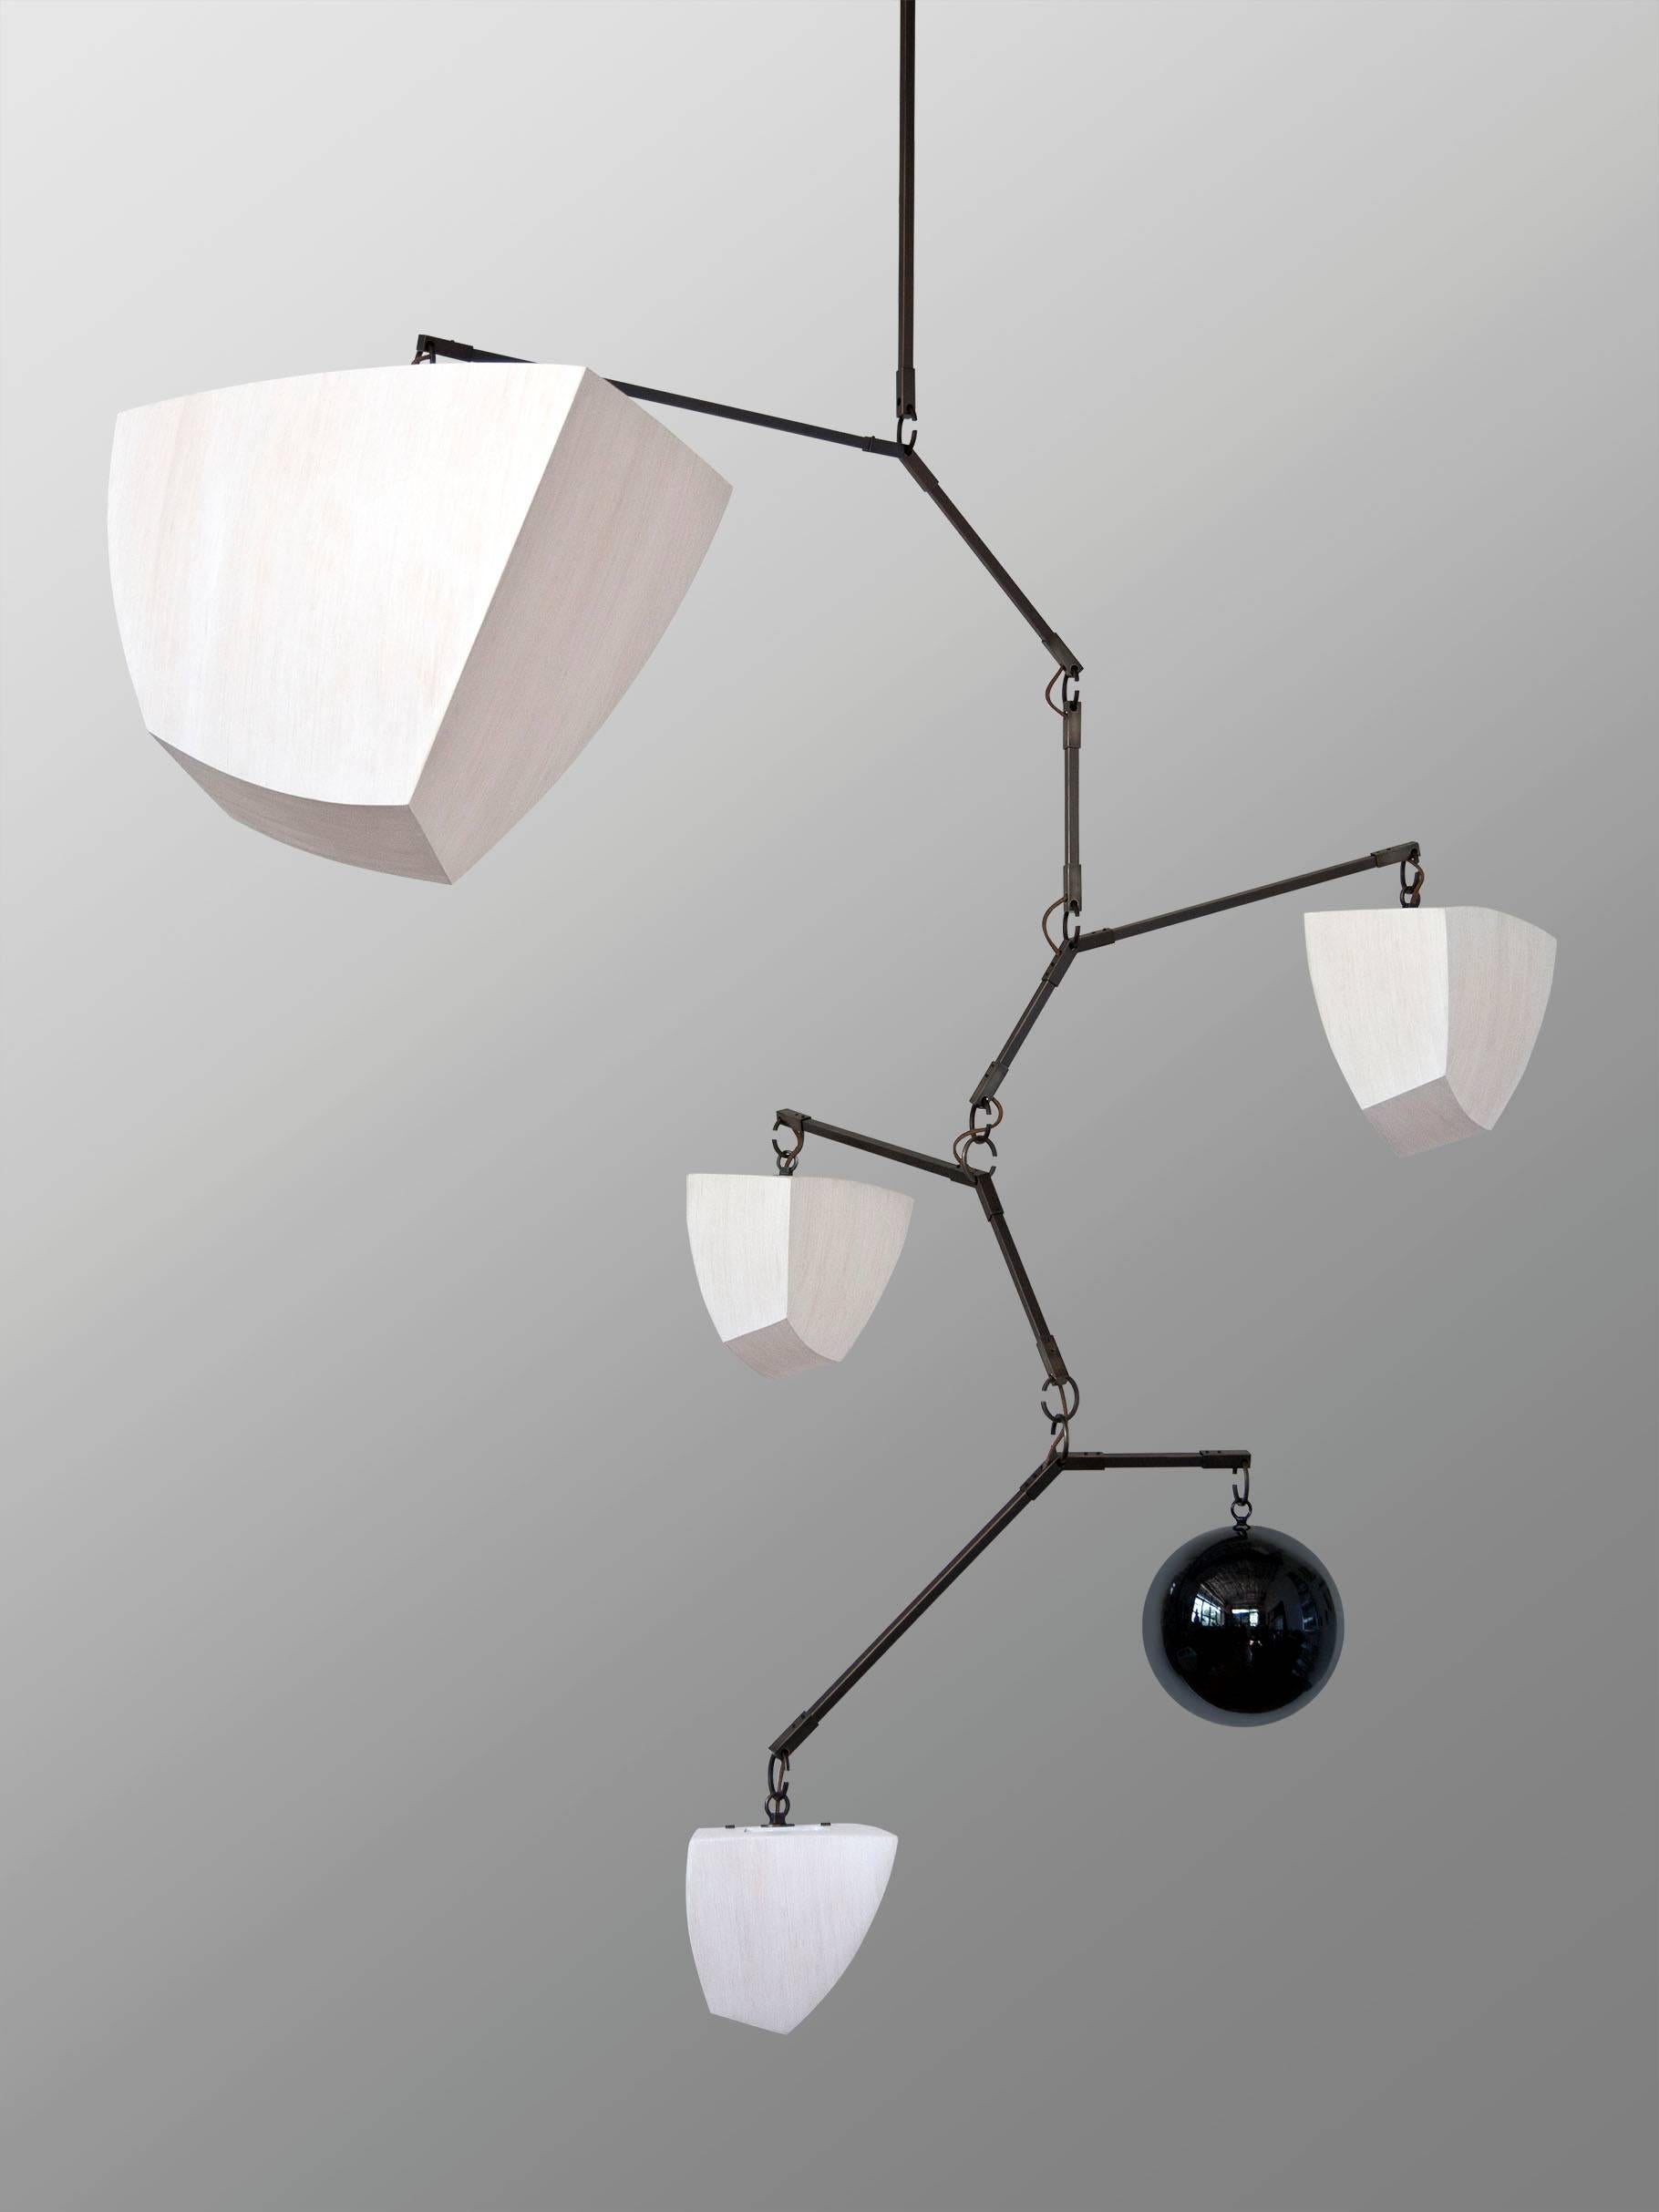 Ivy 5 Bamboo V2: ABCDF is a large mobile chandelier with 4 glowing bamboo polyhedrons, arranged in size order and a glass metal globe. The Ivy Series is a vertically oriented variation which mimics the shape of Ivy vines and it designed for larger,